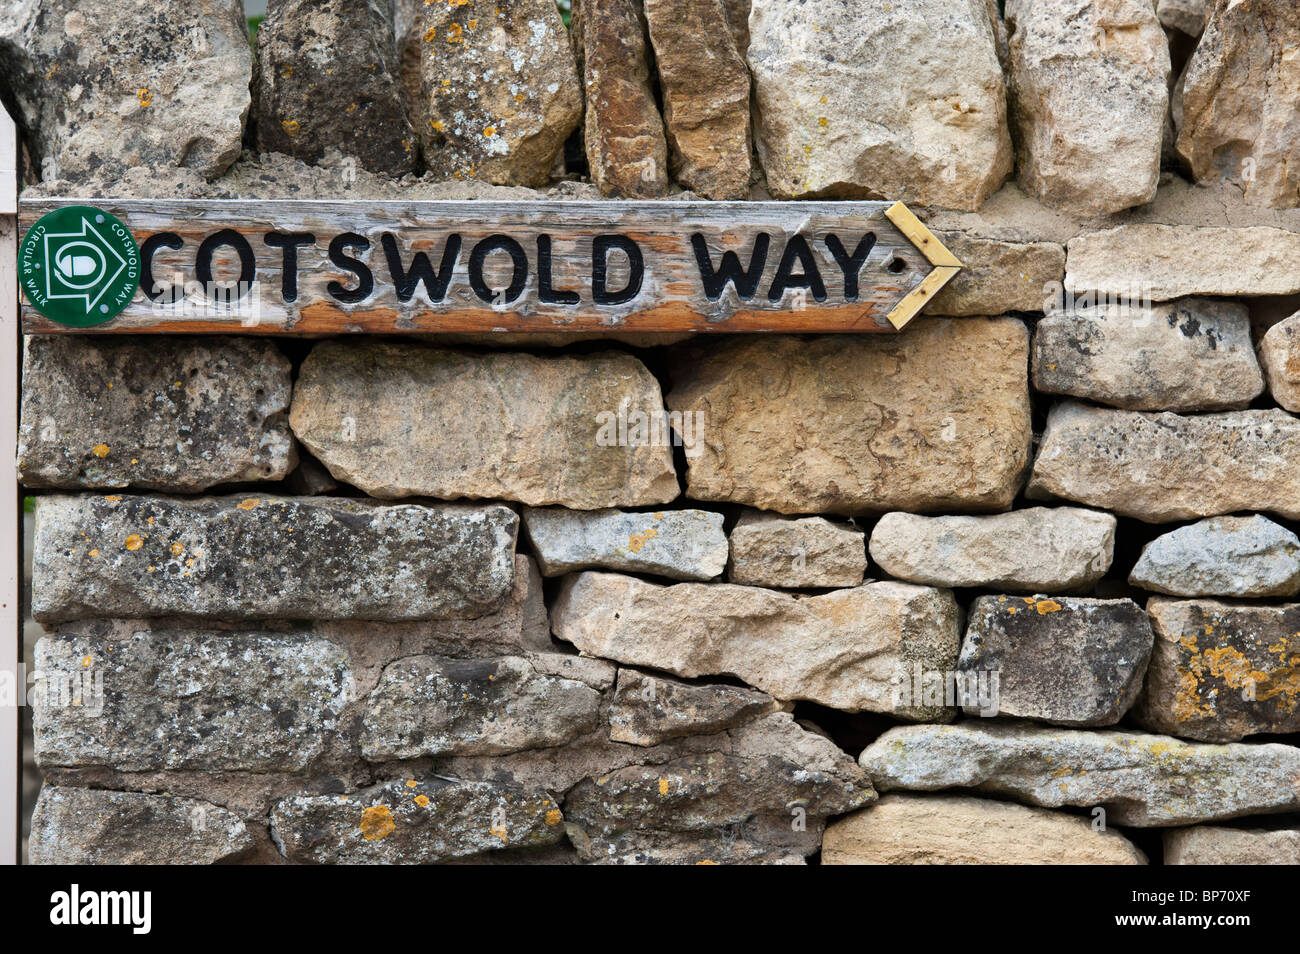 Cotswold Way sign, Chipping Campden, Cotswolds, England Stock Photo